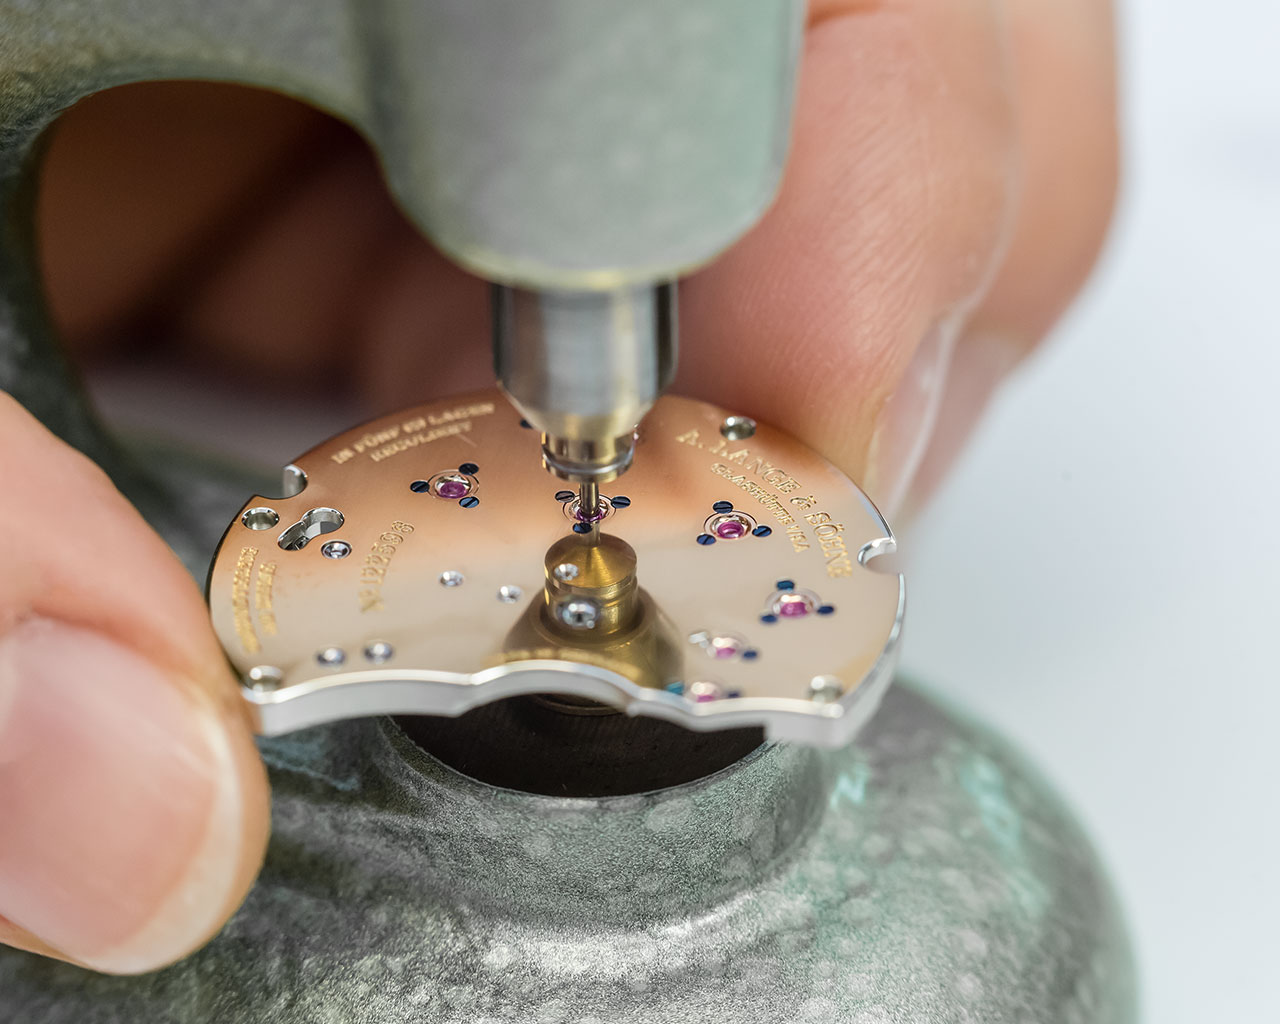 The bearing jewels are pressed into the bores by hand. The friction is reduced by adding a droplet of oil in the recesses of the synthetic ruby bearings. 